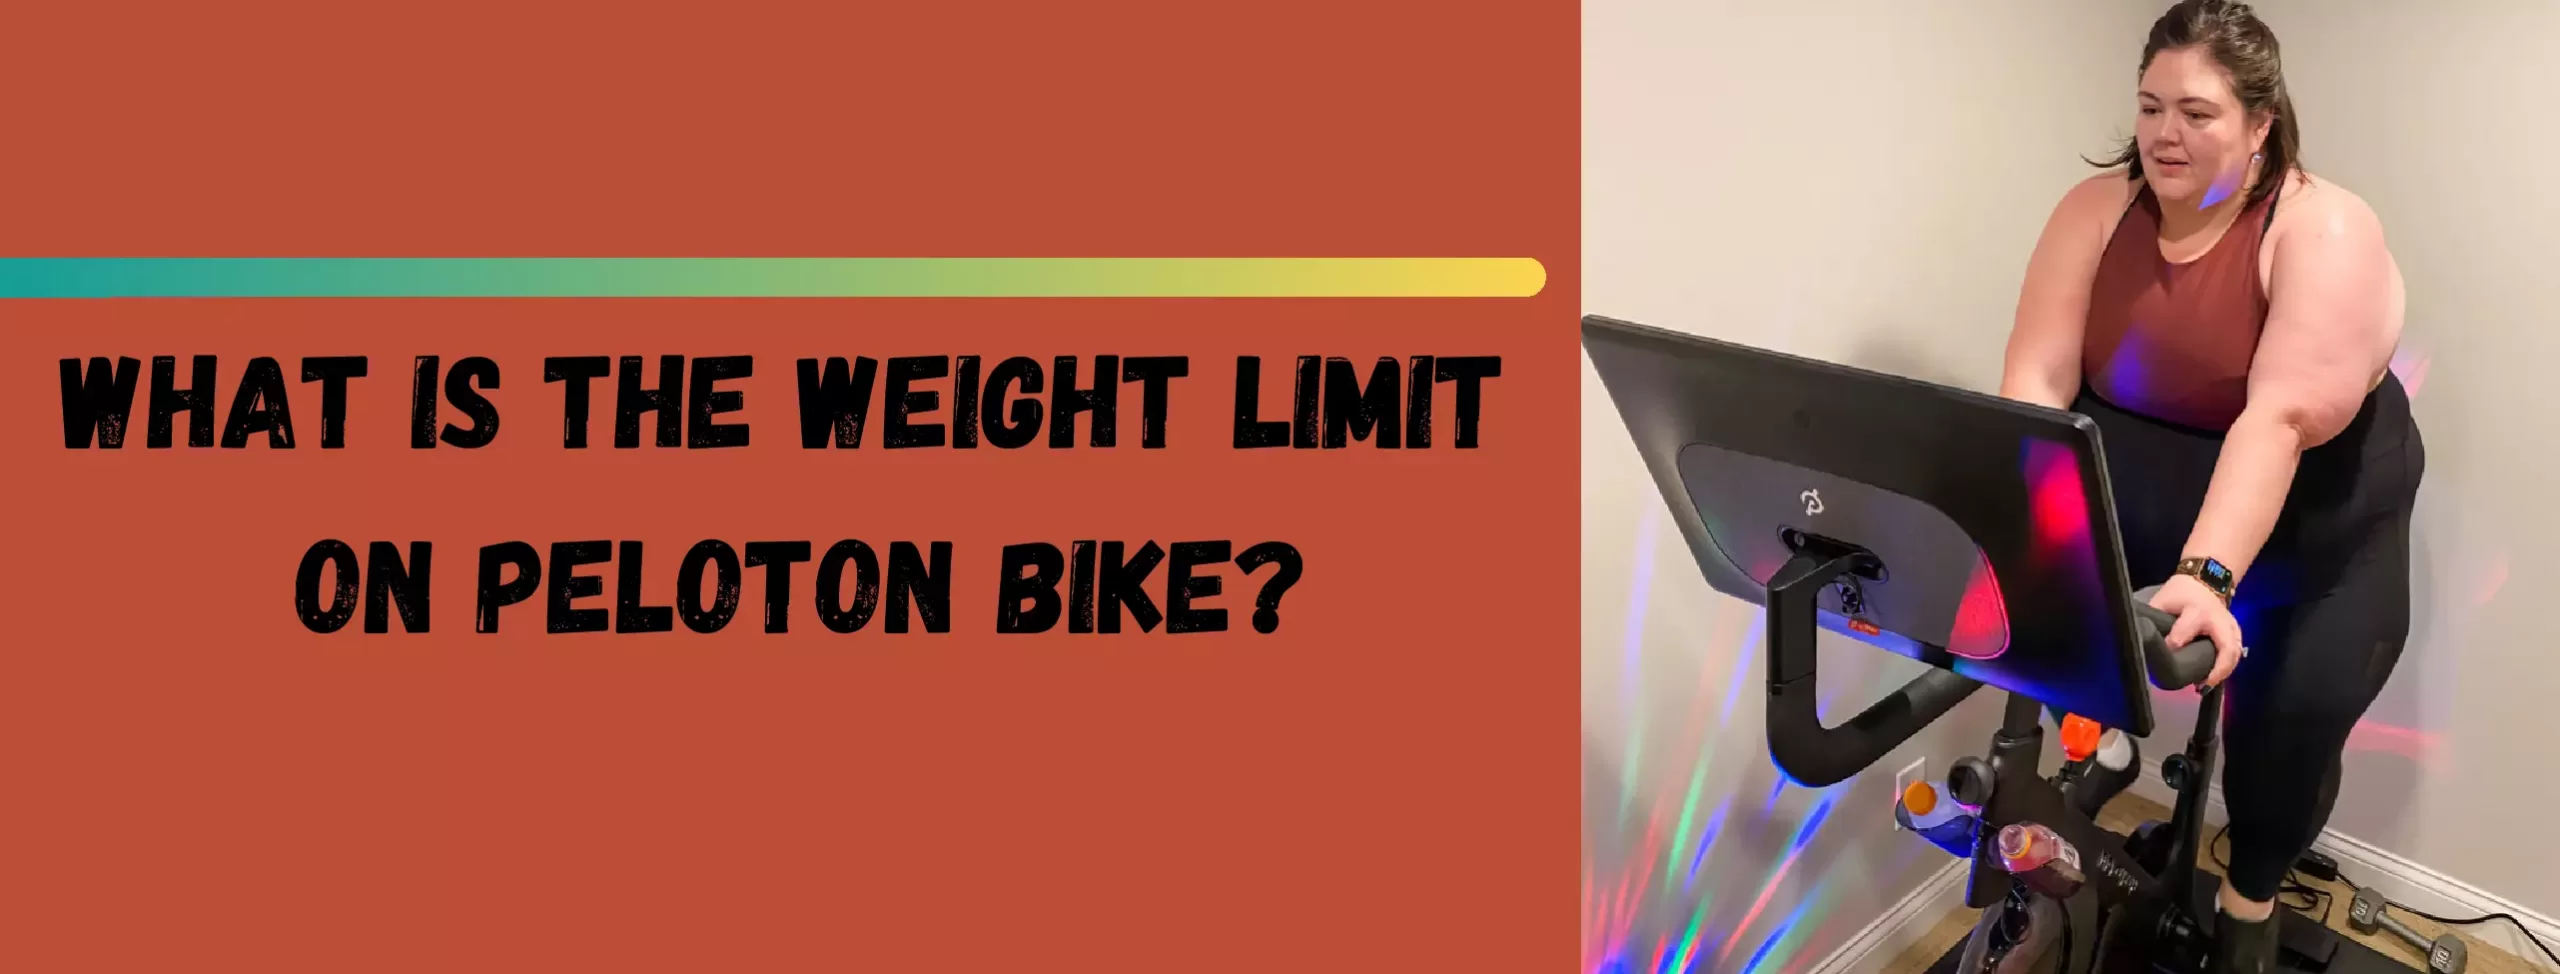 What is the Weight Limit on a Peloton Bike,what is the flywheel weight on a peloton bike,what is the weight of a peloton bike,what is the weight limit for a peloton,Weight Limit on a Peloton Bike,is there a weight limit for peloton,Weight Limit Peloton Bike,Weight Limit Peloton,weight limit peloton tread,does peloton have a weight limit,is there a weight limit on the peloton bike,is peloton good for overweight,how much weight can a peloton bike hold,is peloton for overweight beginners,does weight matter on peloton,Weight Limit on a Peloton,is there a weight limit on peloton bike,peloton weight limit,peloton bike weight limit,peloton tread weight limit,weight limit for peloton,peloton bike weight,peloton treadmill weight limit,how heavy is a peloton bike,weight limit on peloton,peloton max weight